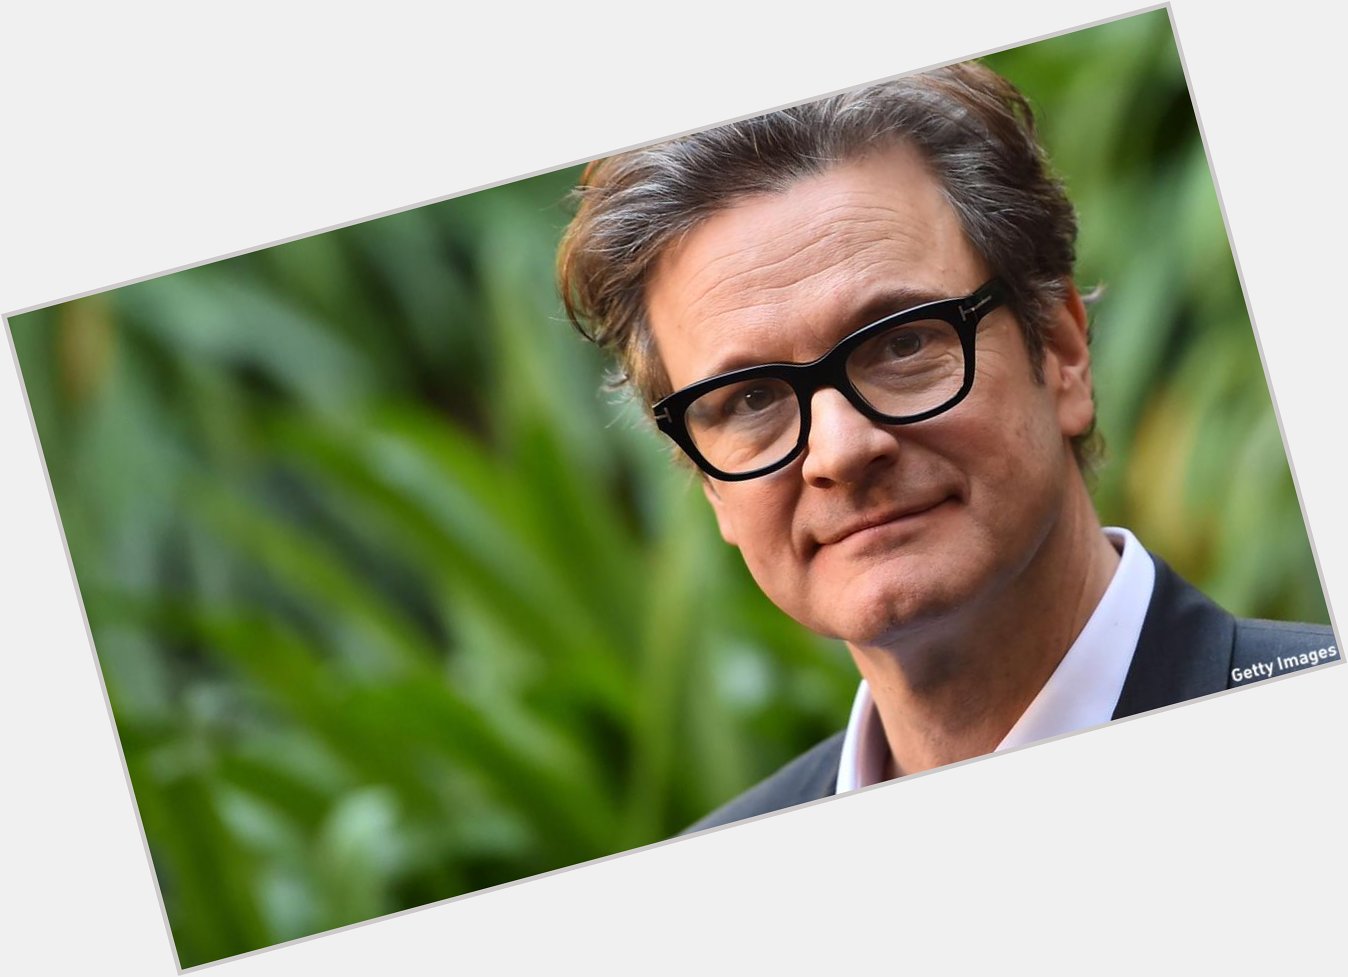 Happy bday to Colin Firth who turns 55 today! Here are 10 reasons (out of many) we love him:  